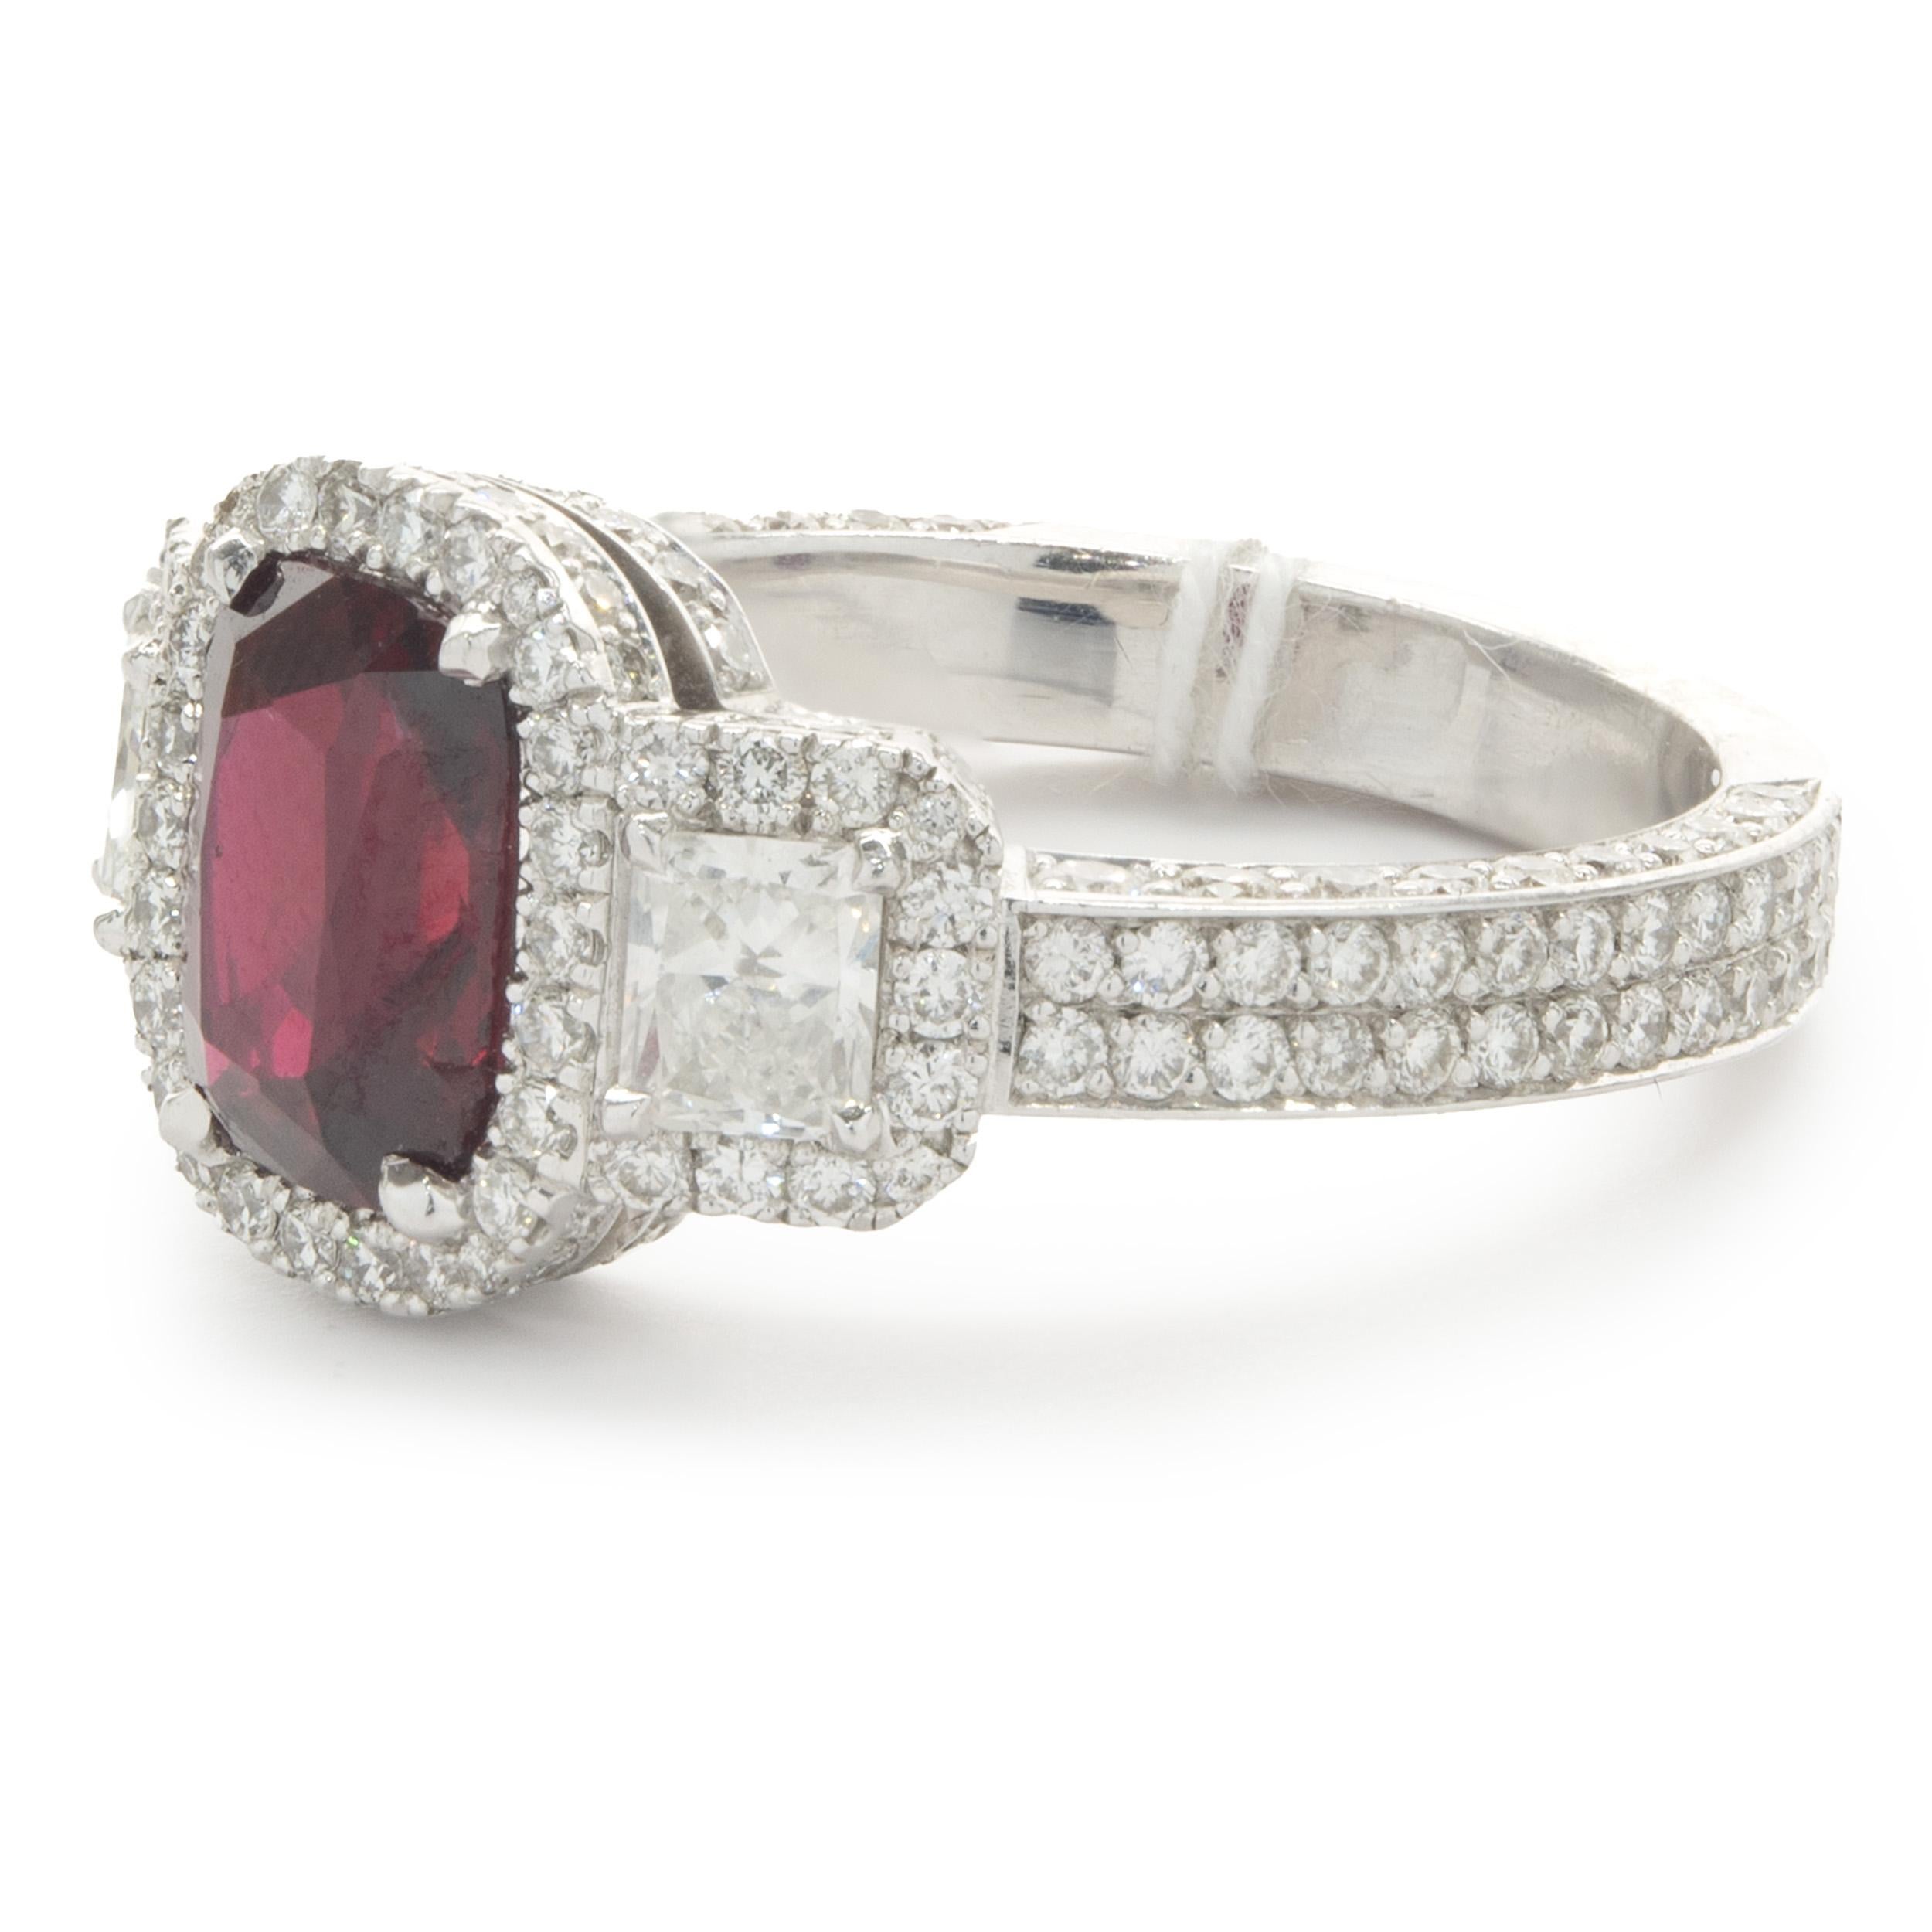 18 Karat White Gold Pave Diamond and Ruby Ring In Excellent Condition For Sale In Scottsdale, AZ